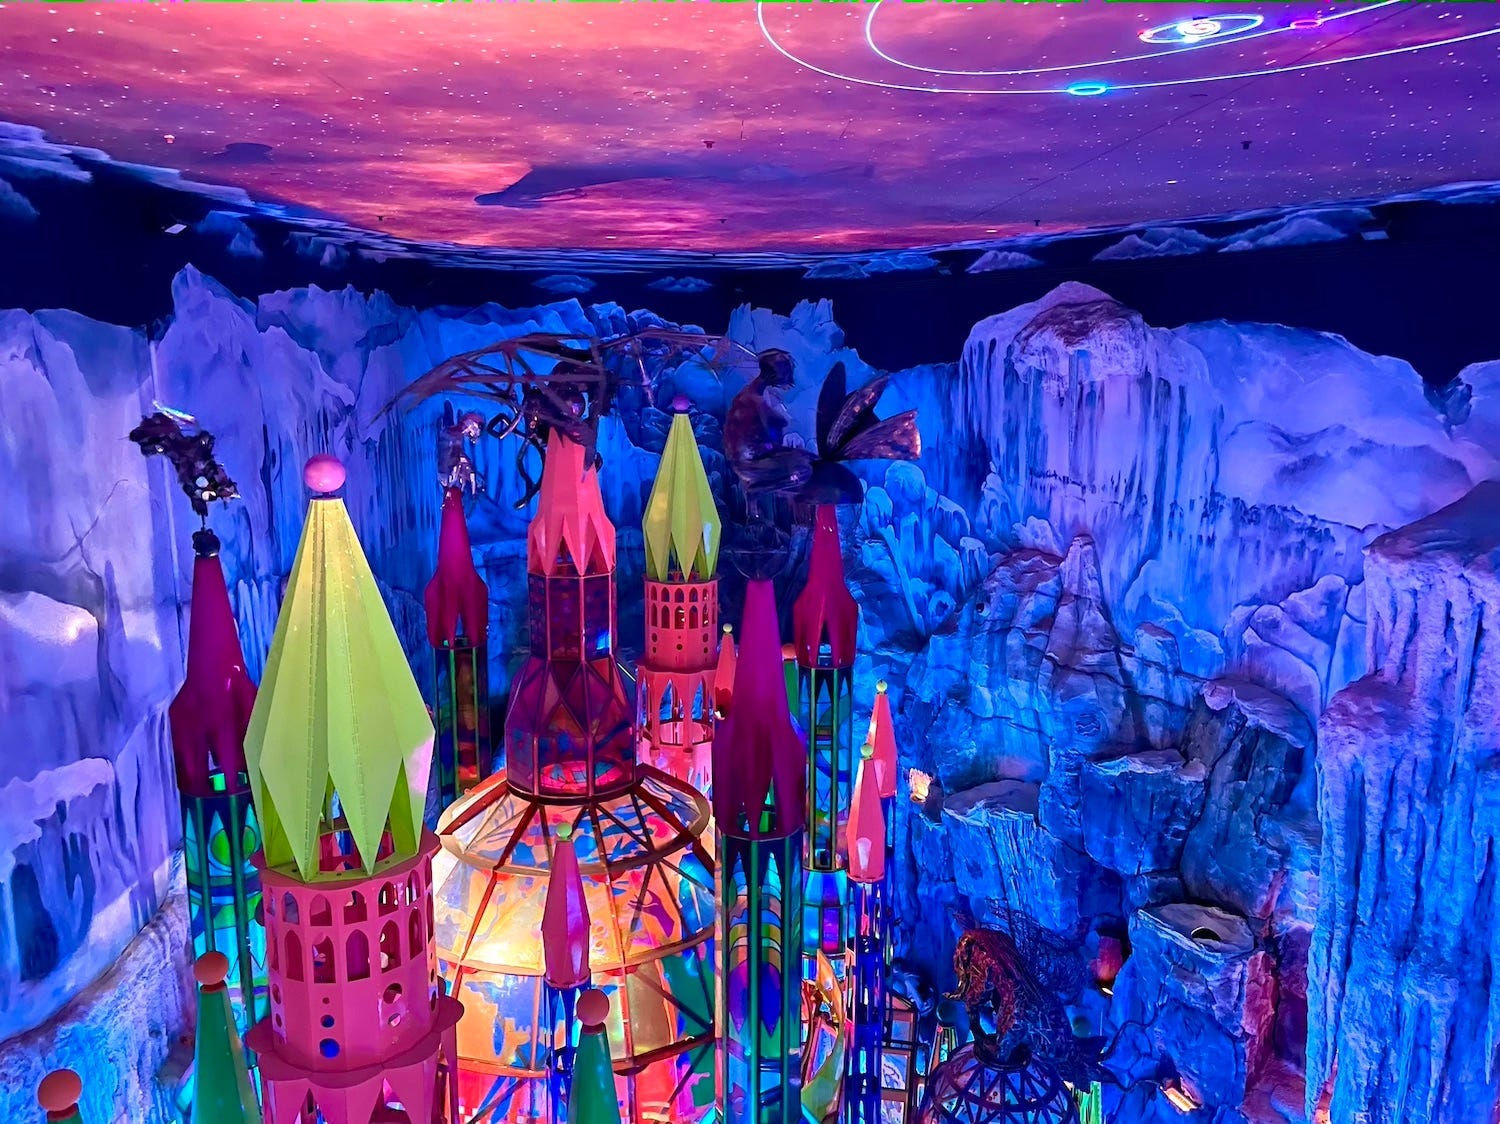 One area in the four-story art exhibit, Meow Wolf.